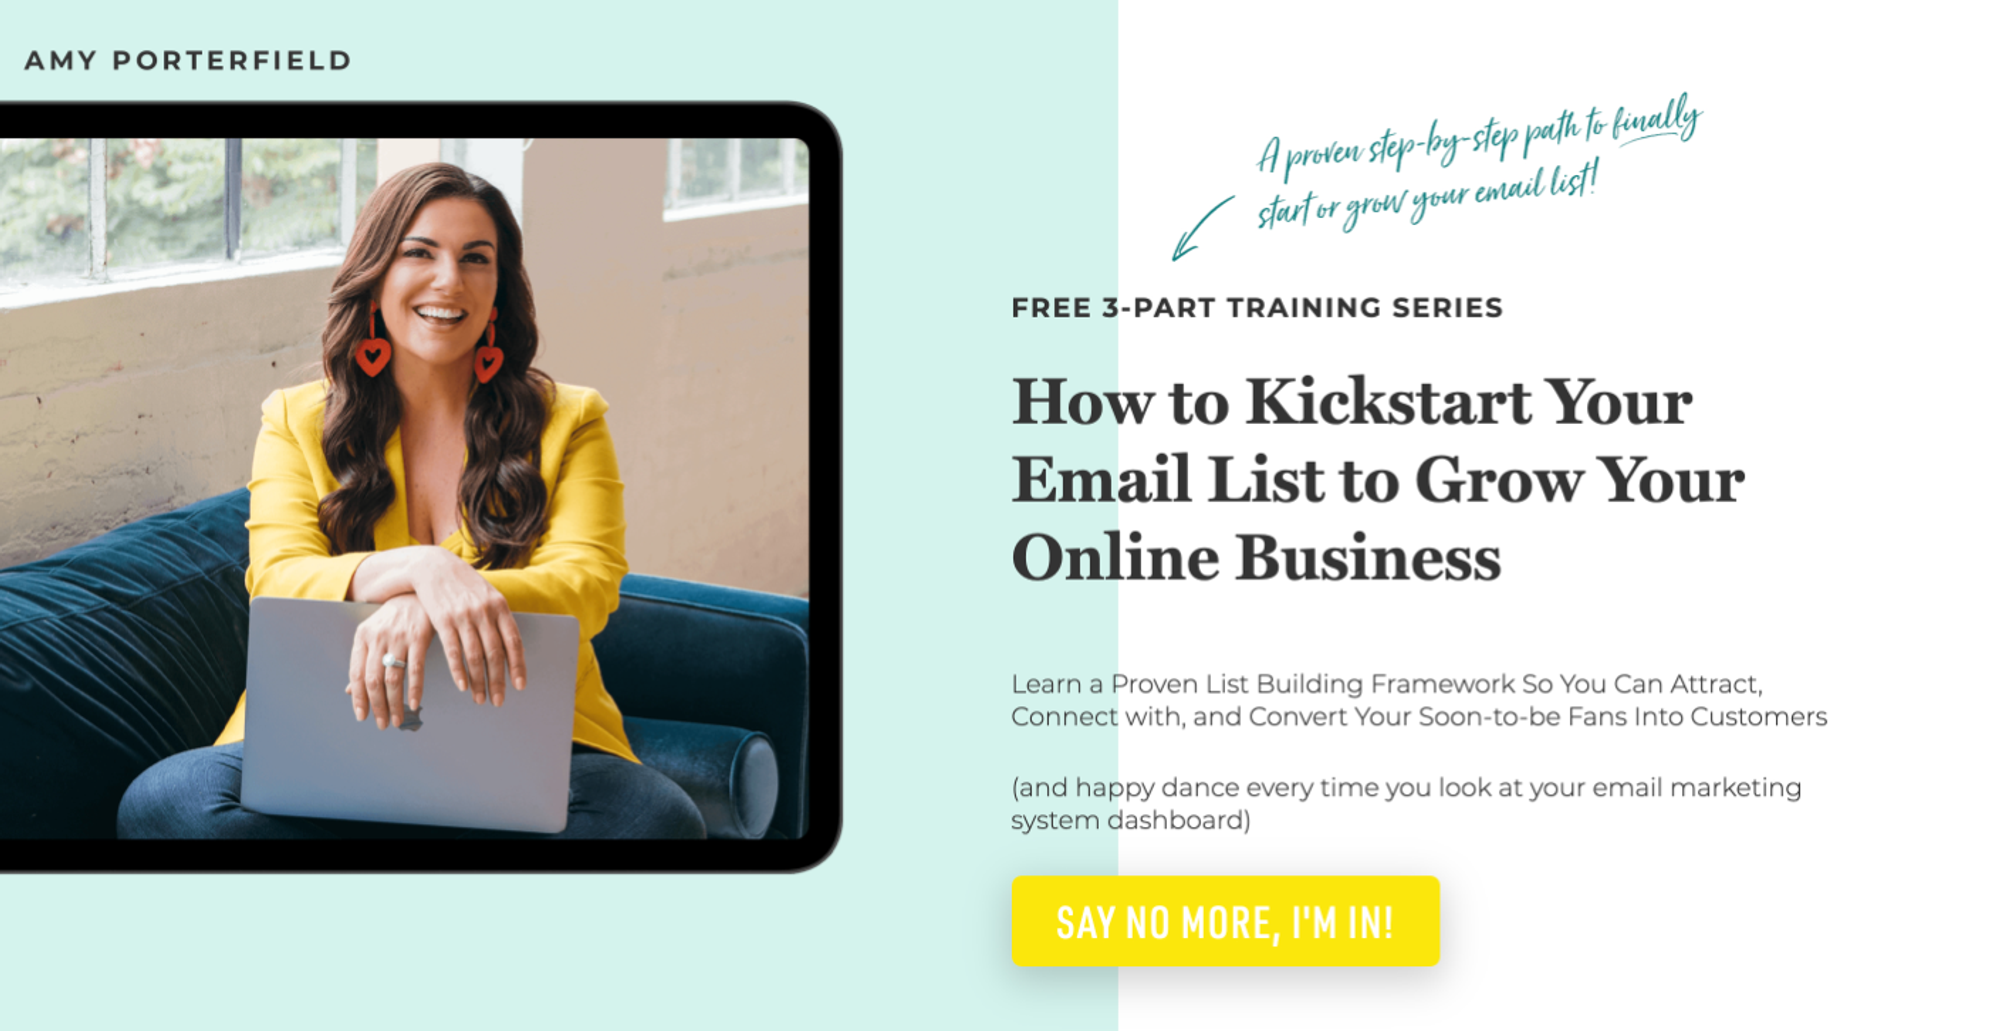 Email List Growth Training Series